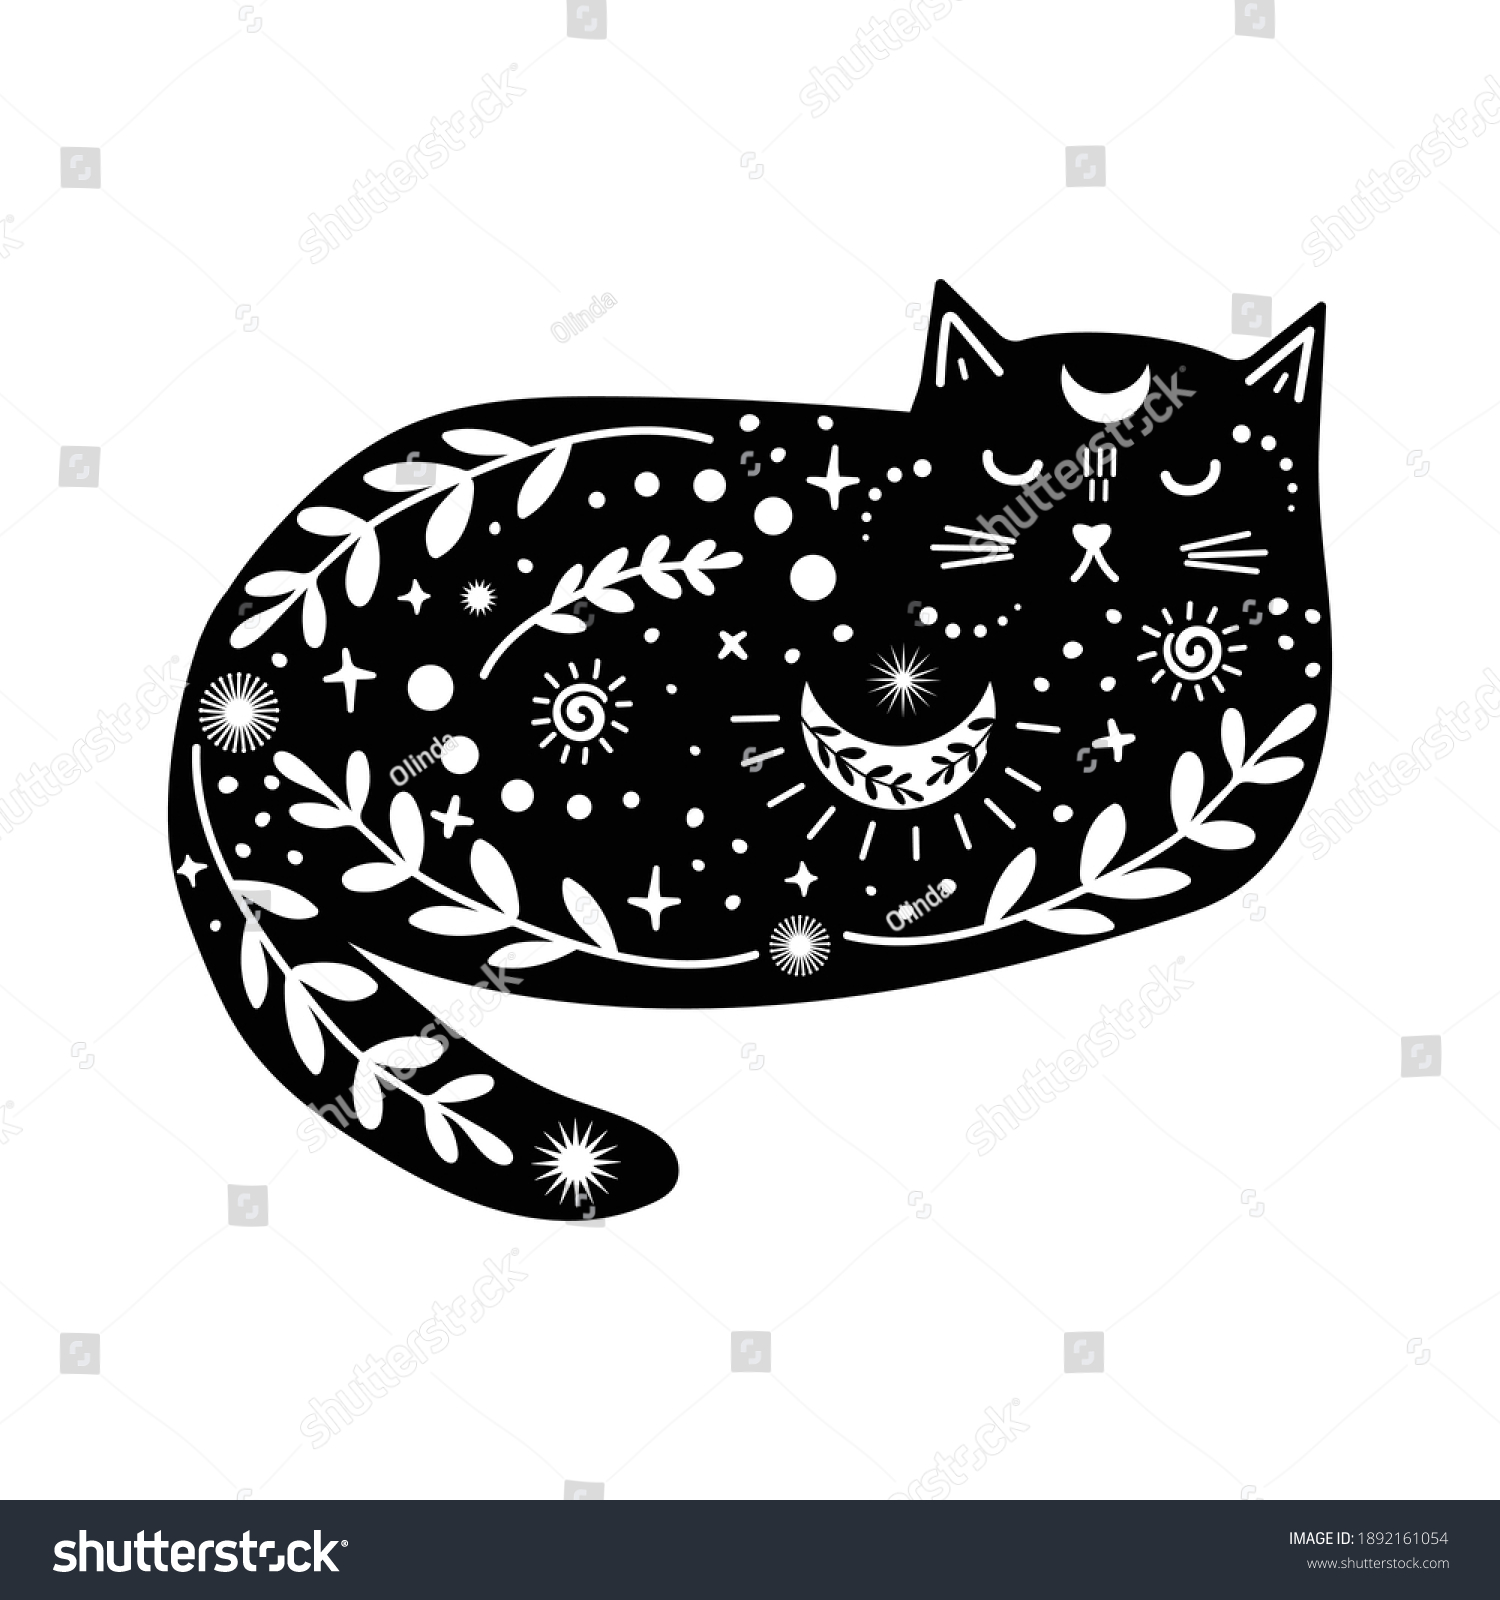 SVG of Magical black cat with white floral and celestial ornaments. Lunar witch aesthetic vector illustration. Modern Boho style doodle art svg